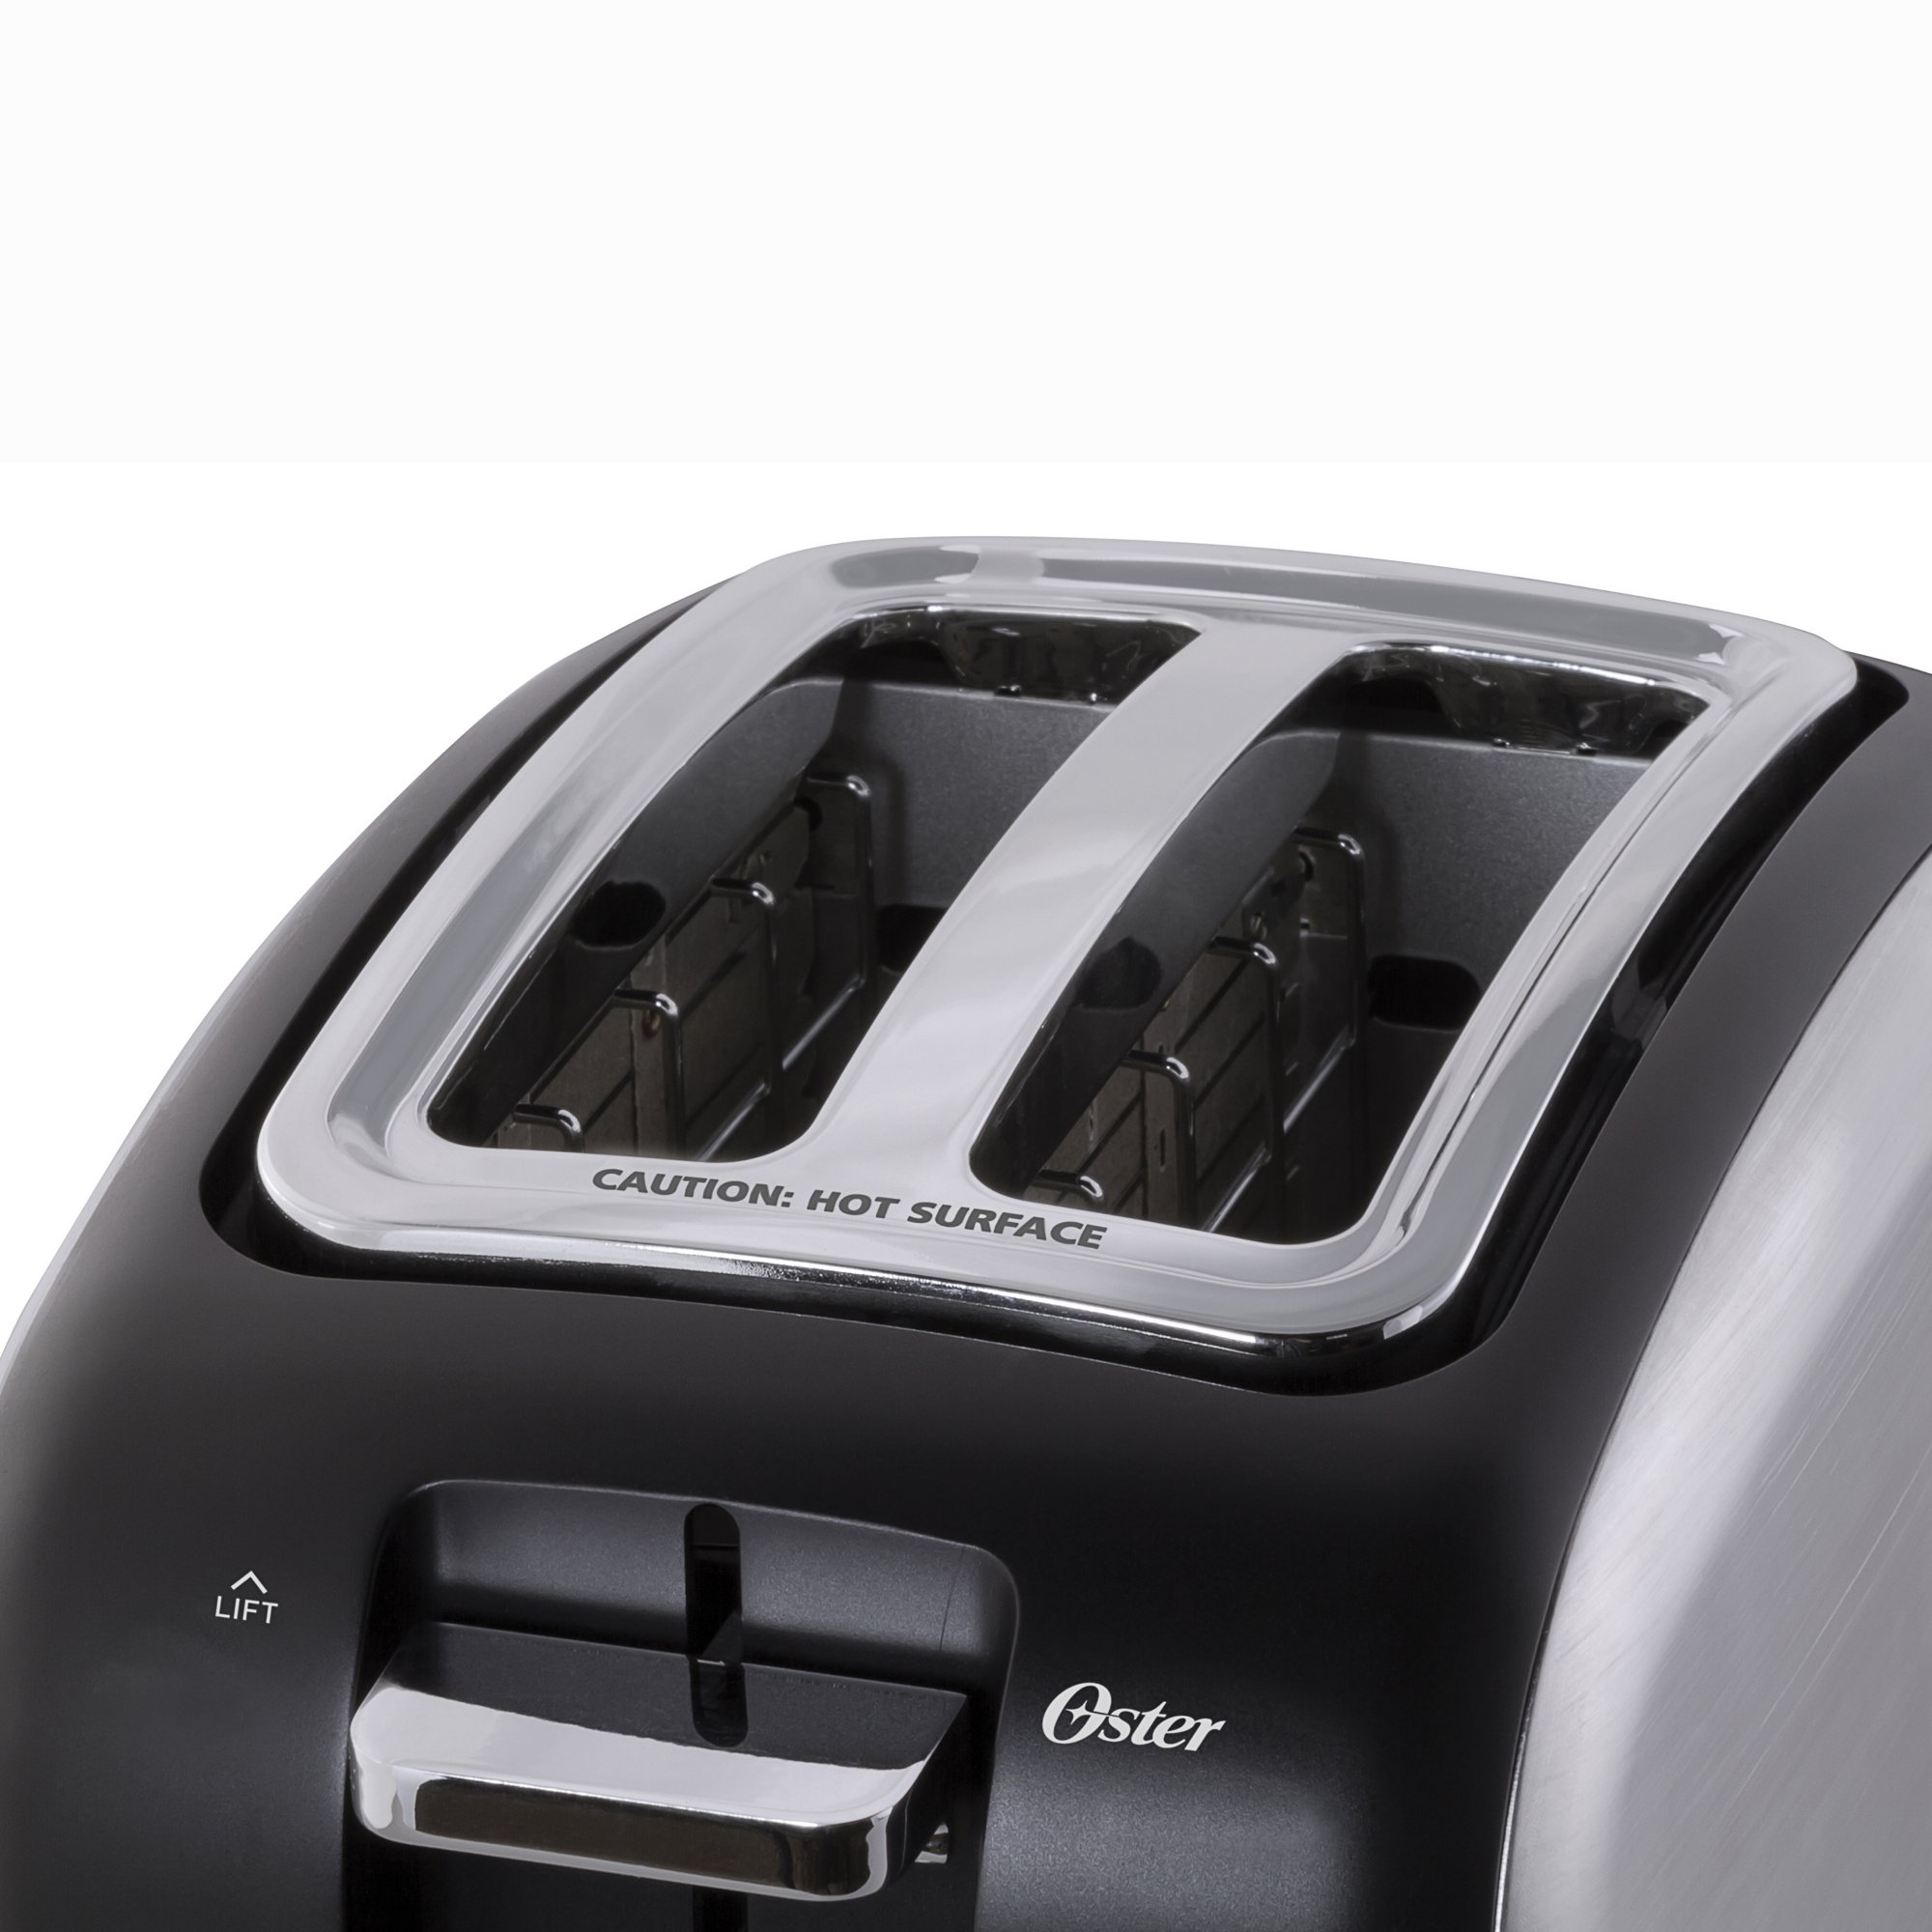 Aicok 2 Slice Automatic Toaster Stainless Steel Extra Wide Slots